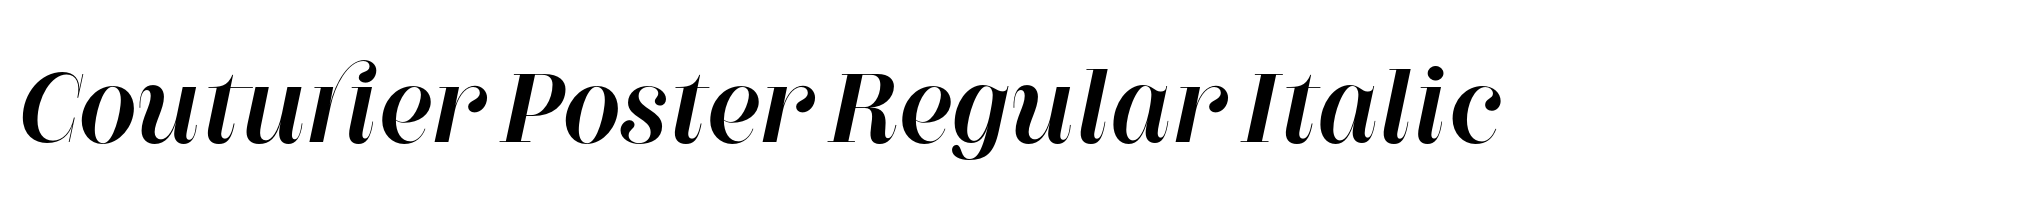 Couturier Poster Regular Italic image